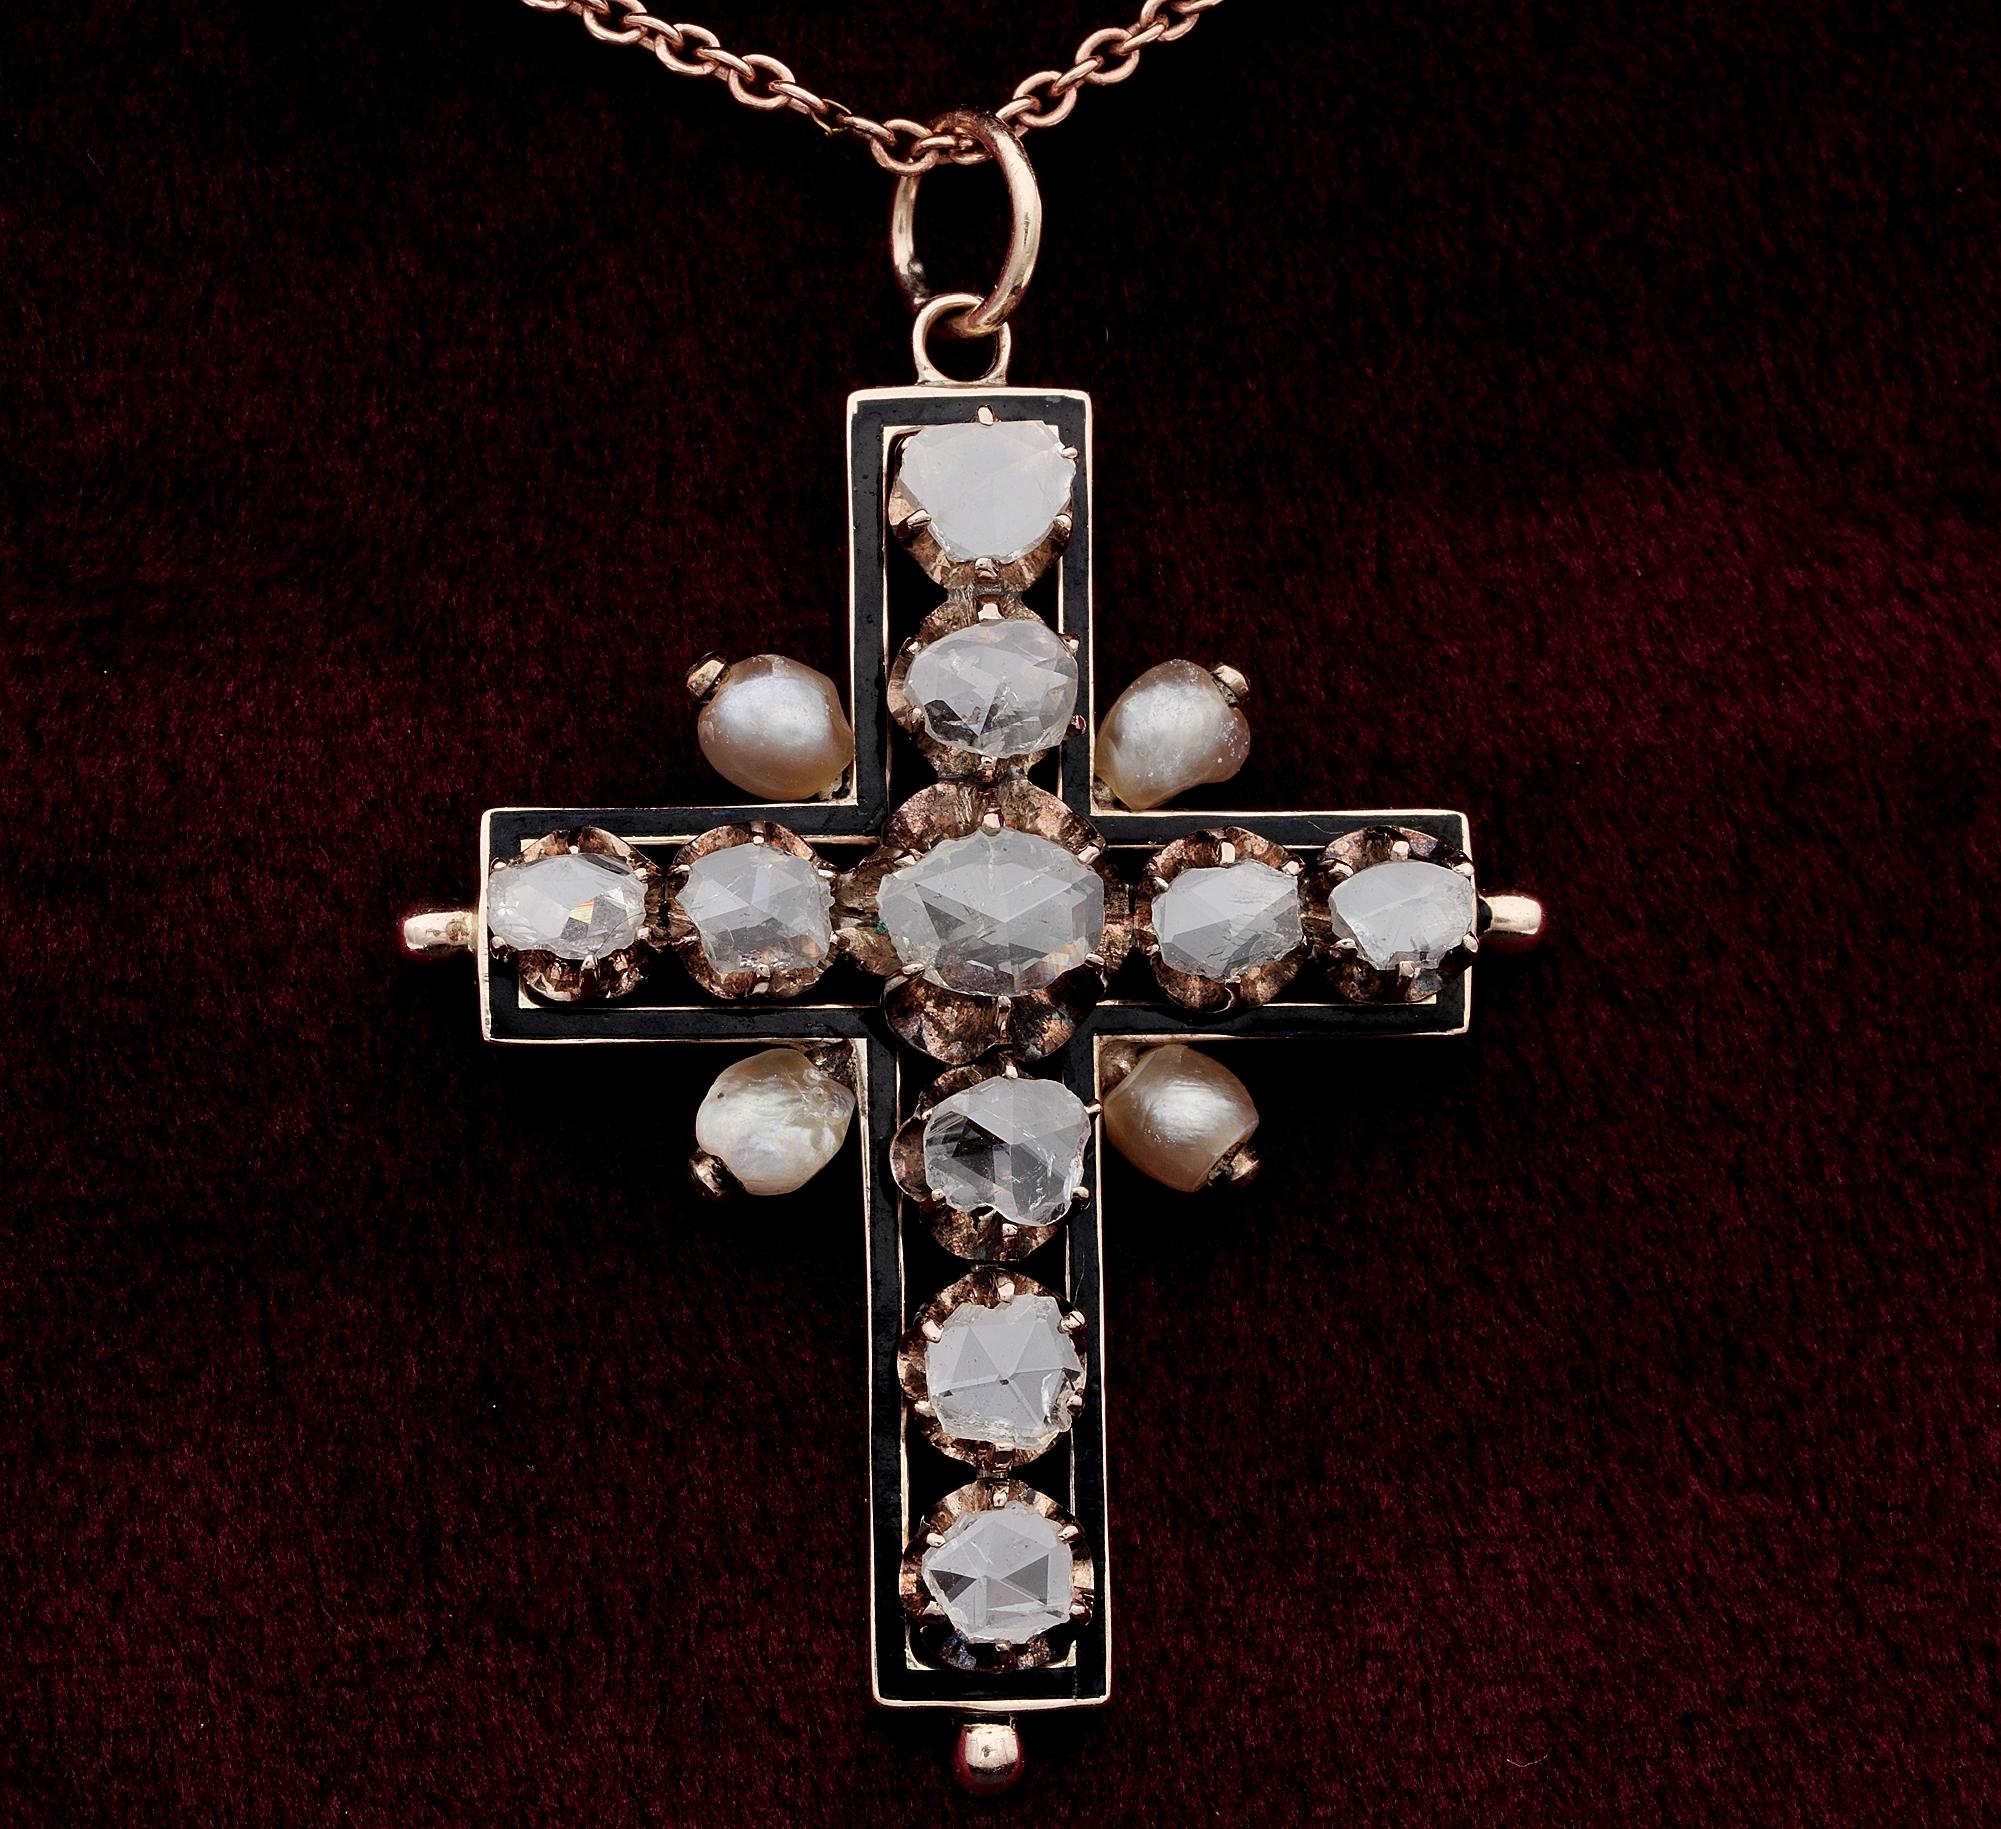 Beautiful Georgian period Diamond cross – 1820 ca
Hand crafted of solid 16 Kt rose gold – unmarked
Modelled in the latin design, beautiful enhanced by black enameling delineating borders
Set Throughout with a selection of antique Rose cut Diamonds